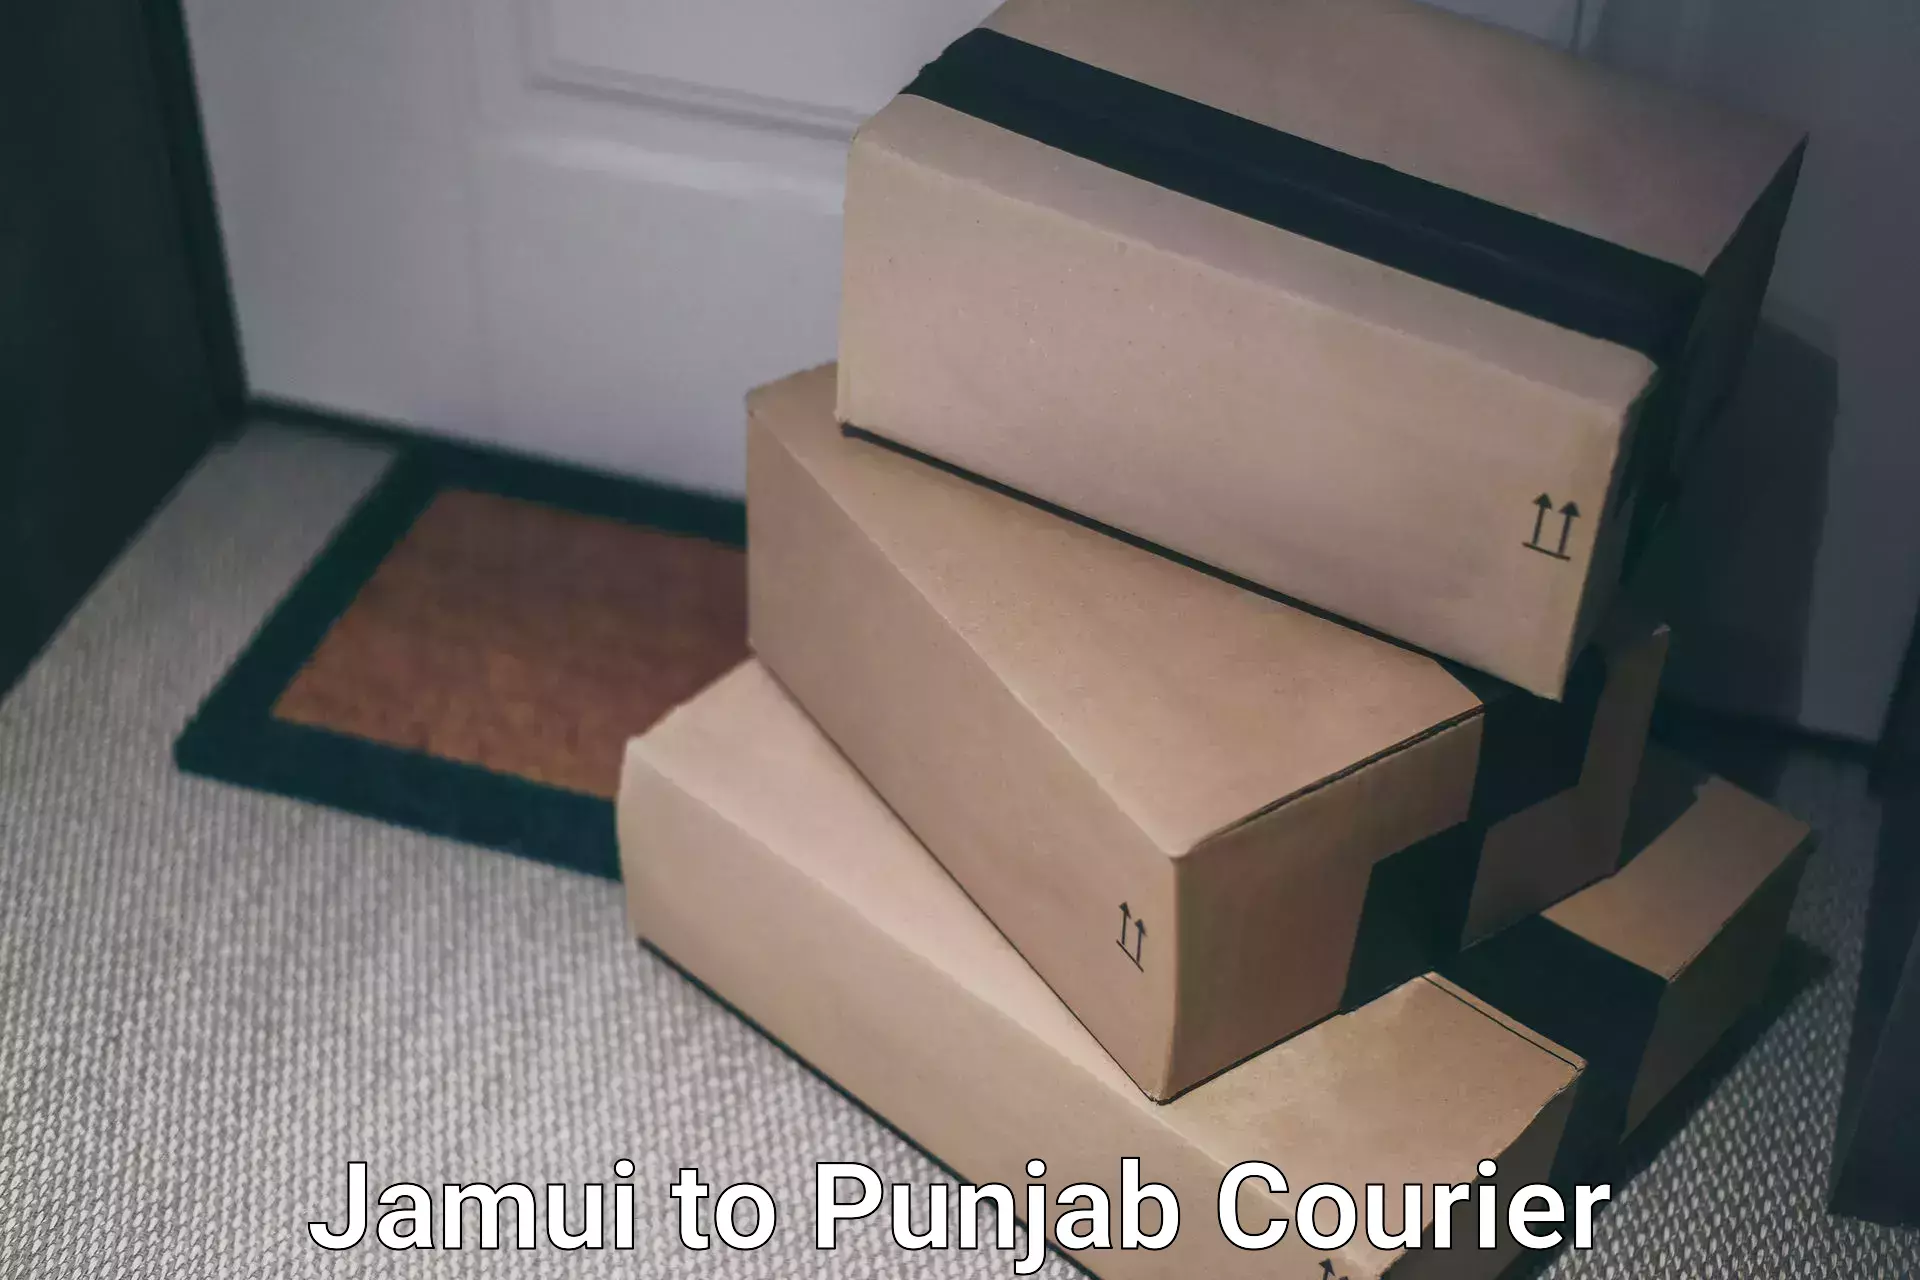 Express package delivery Jamui to Faridkot